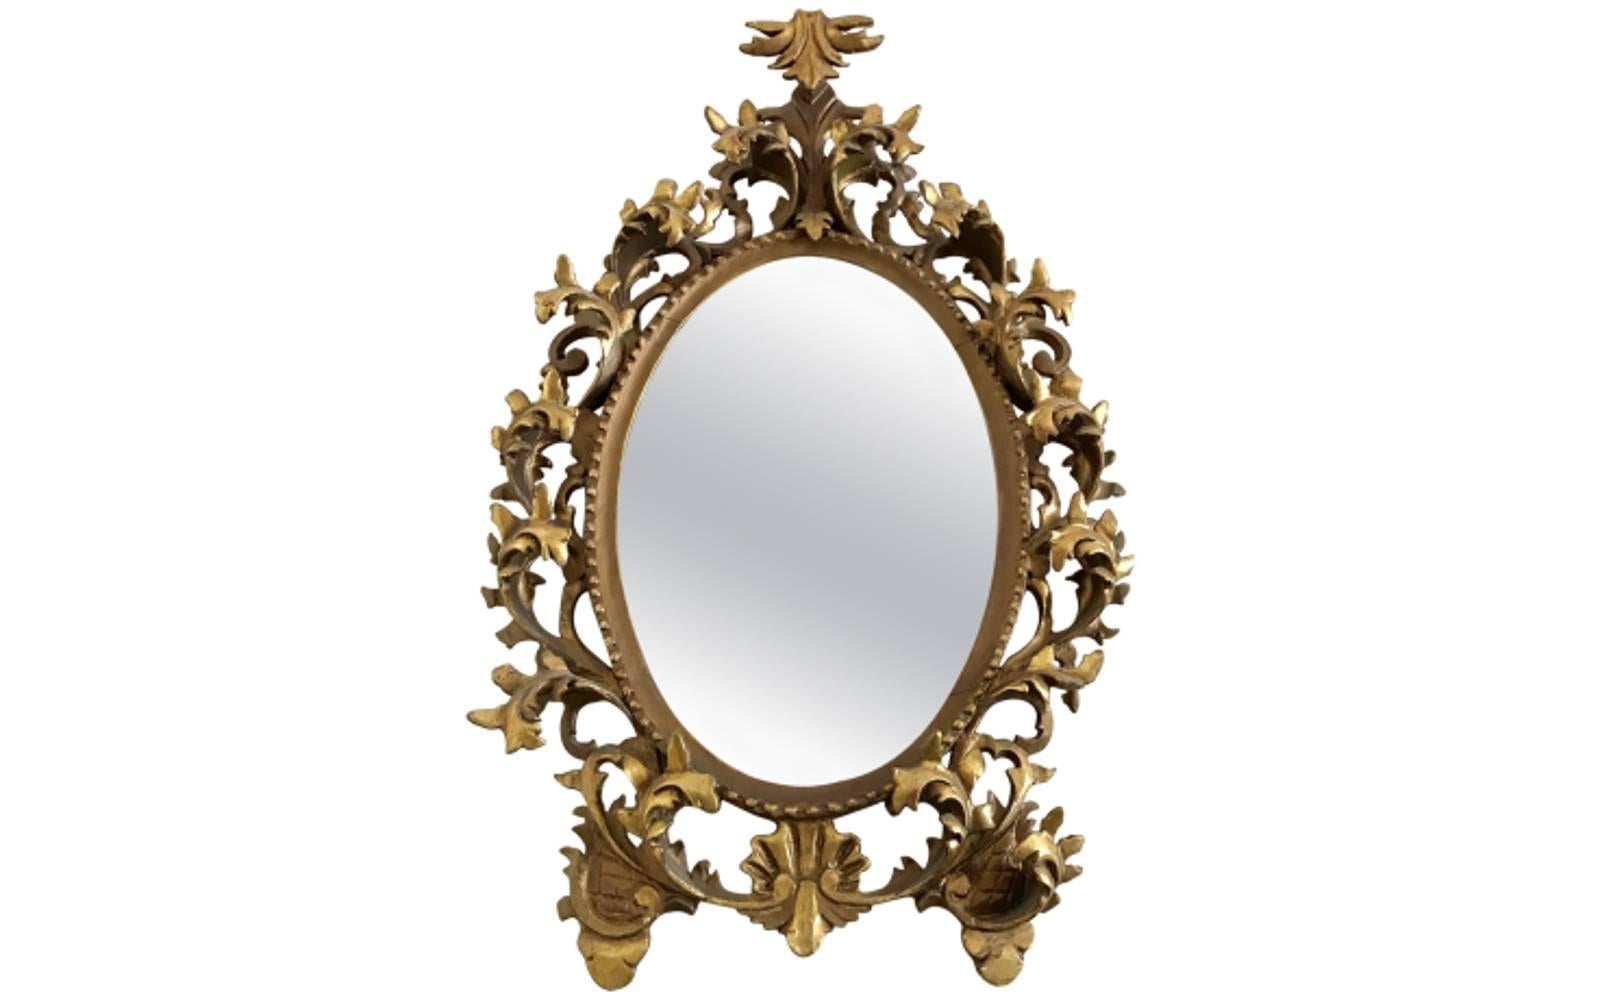 Pair of French Monumental Rococo gilded mirrors.
 This elegant pair of oval mirrors features elaborately scrolled giltwood and gesso frames. These eye-catching accessories make a lavish statement in any space.